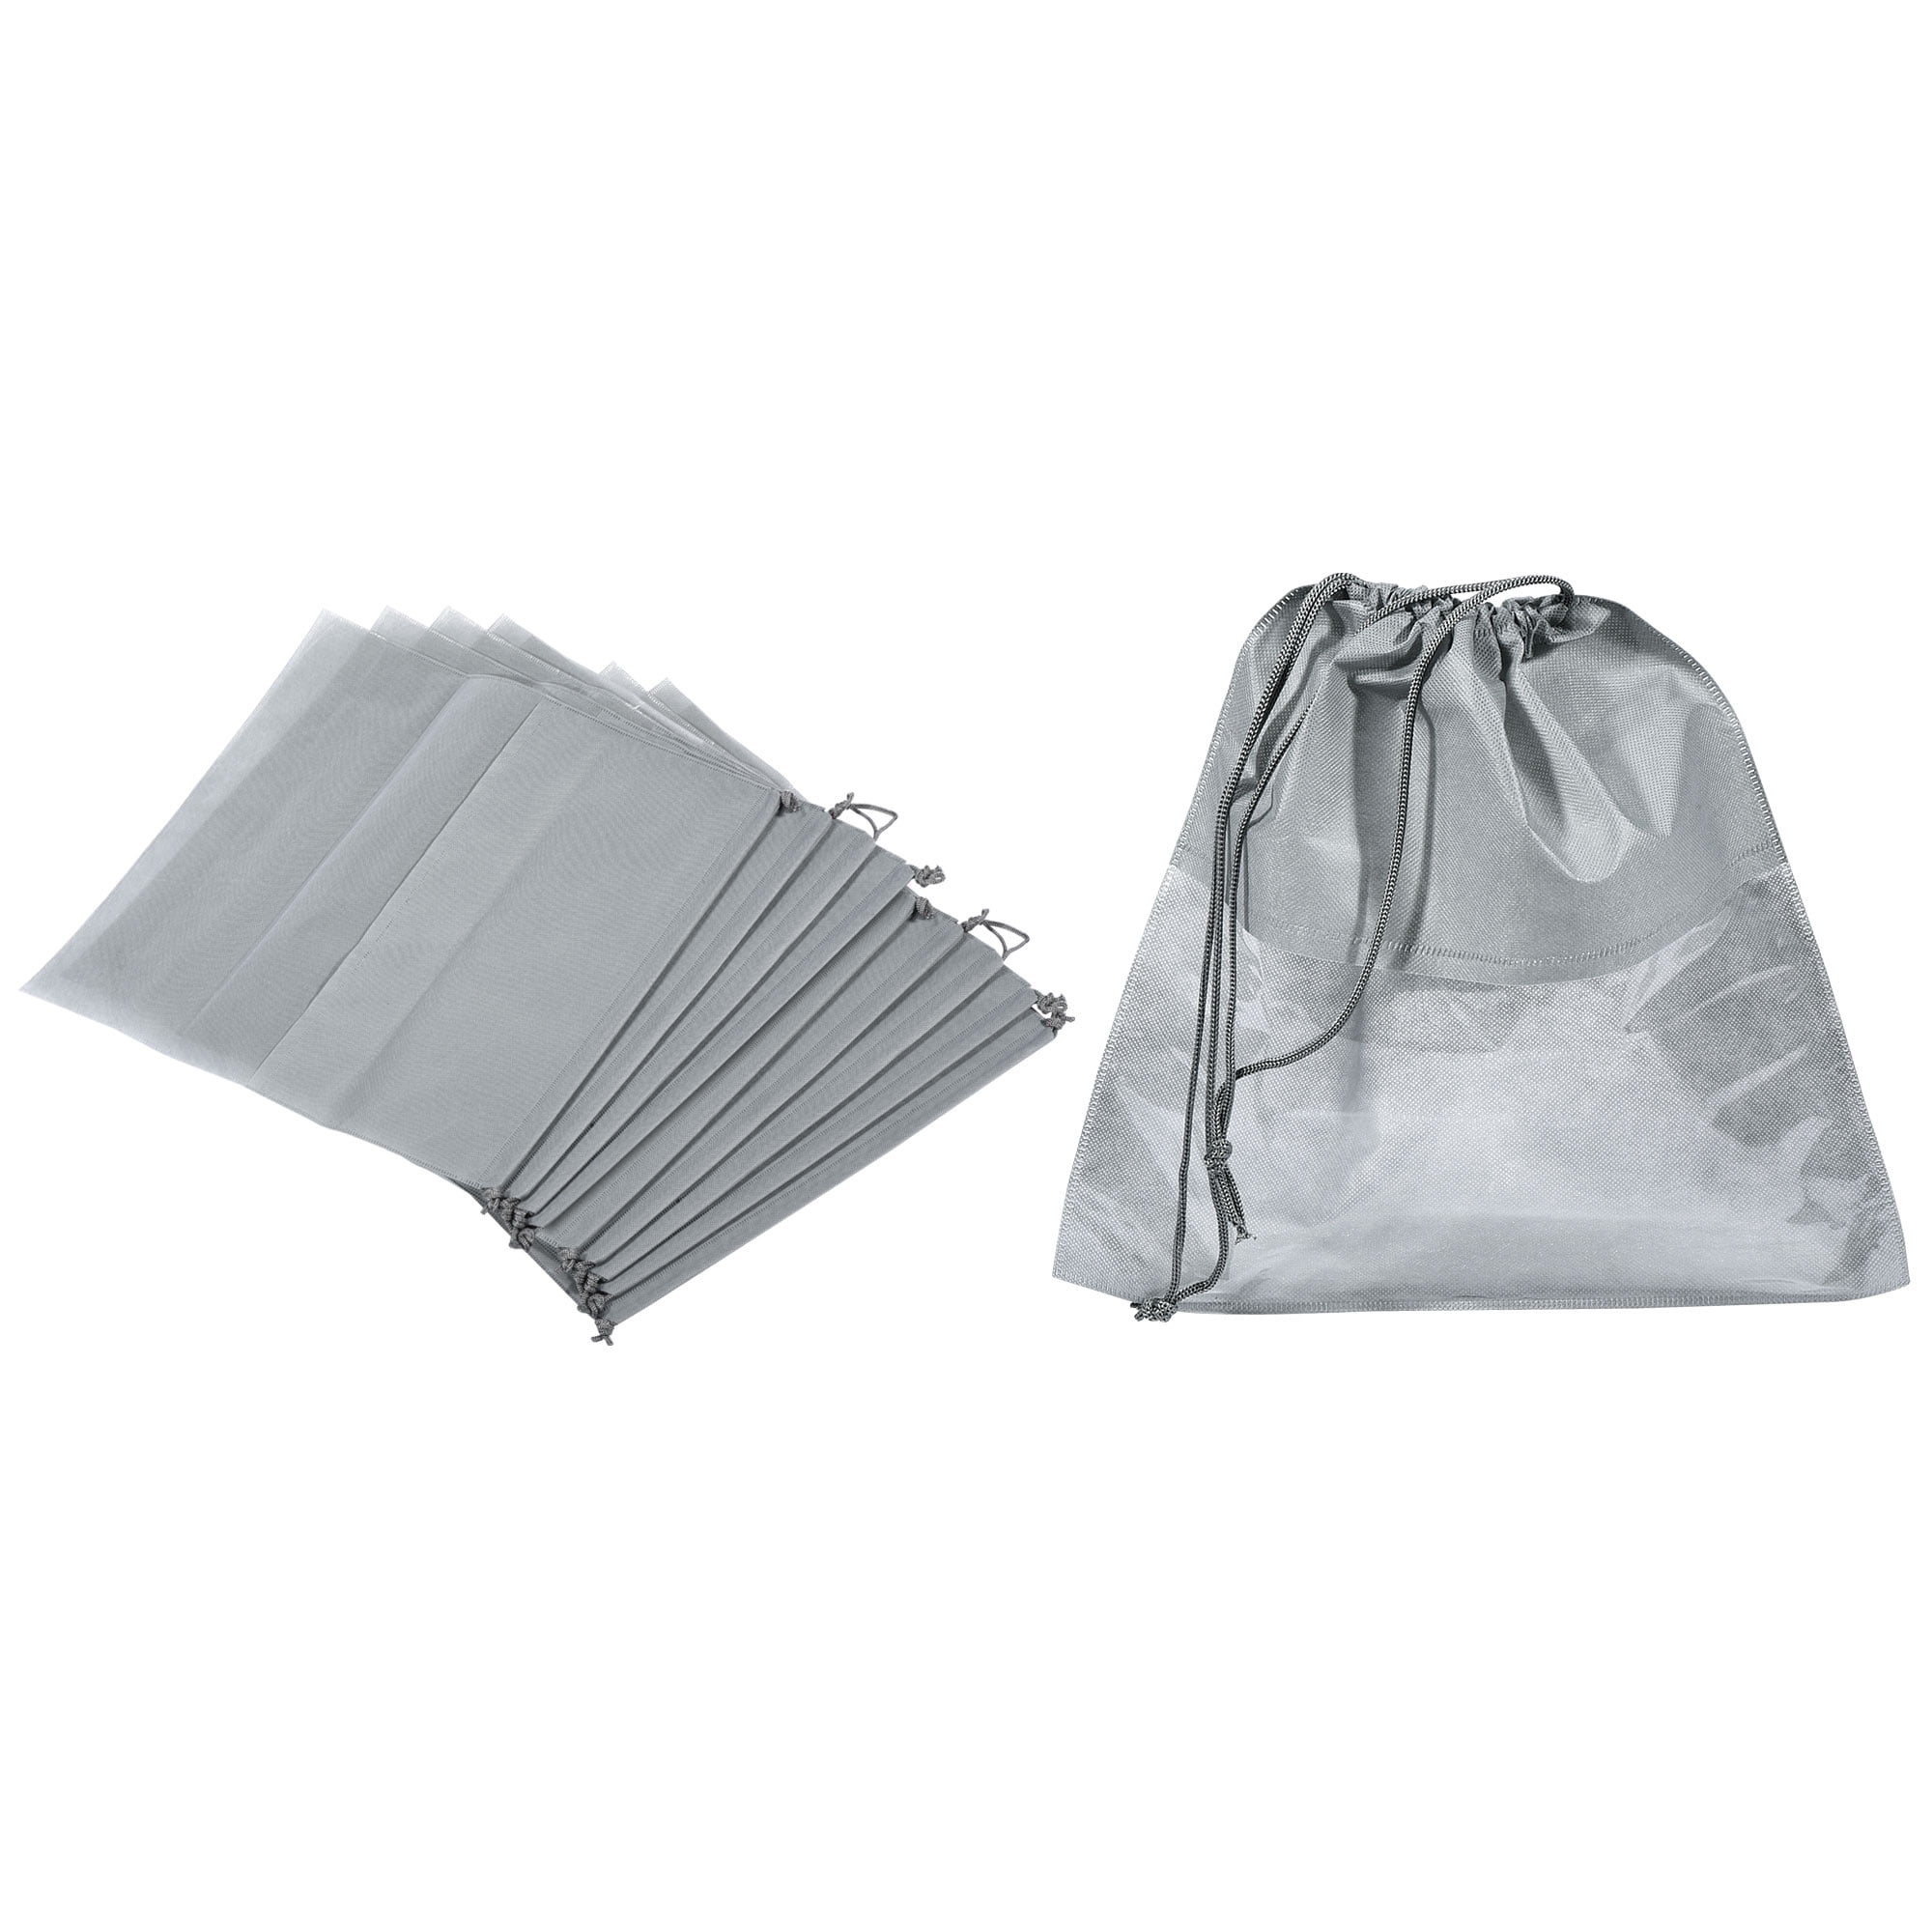 10 Pcs Dust Bags for Purses and Handbags Silk Dust Cover Bag for Handbags  Purses Shoes Boots Silk Drawstring Storage Bags Purse Dust Bags for  Storage